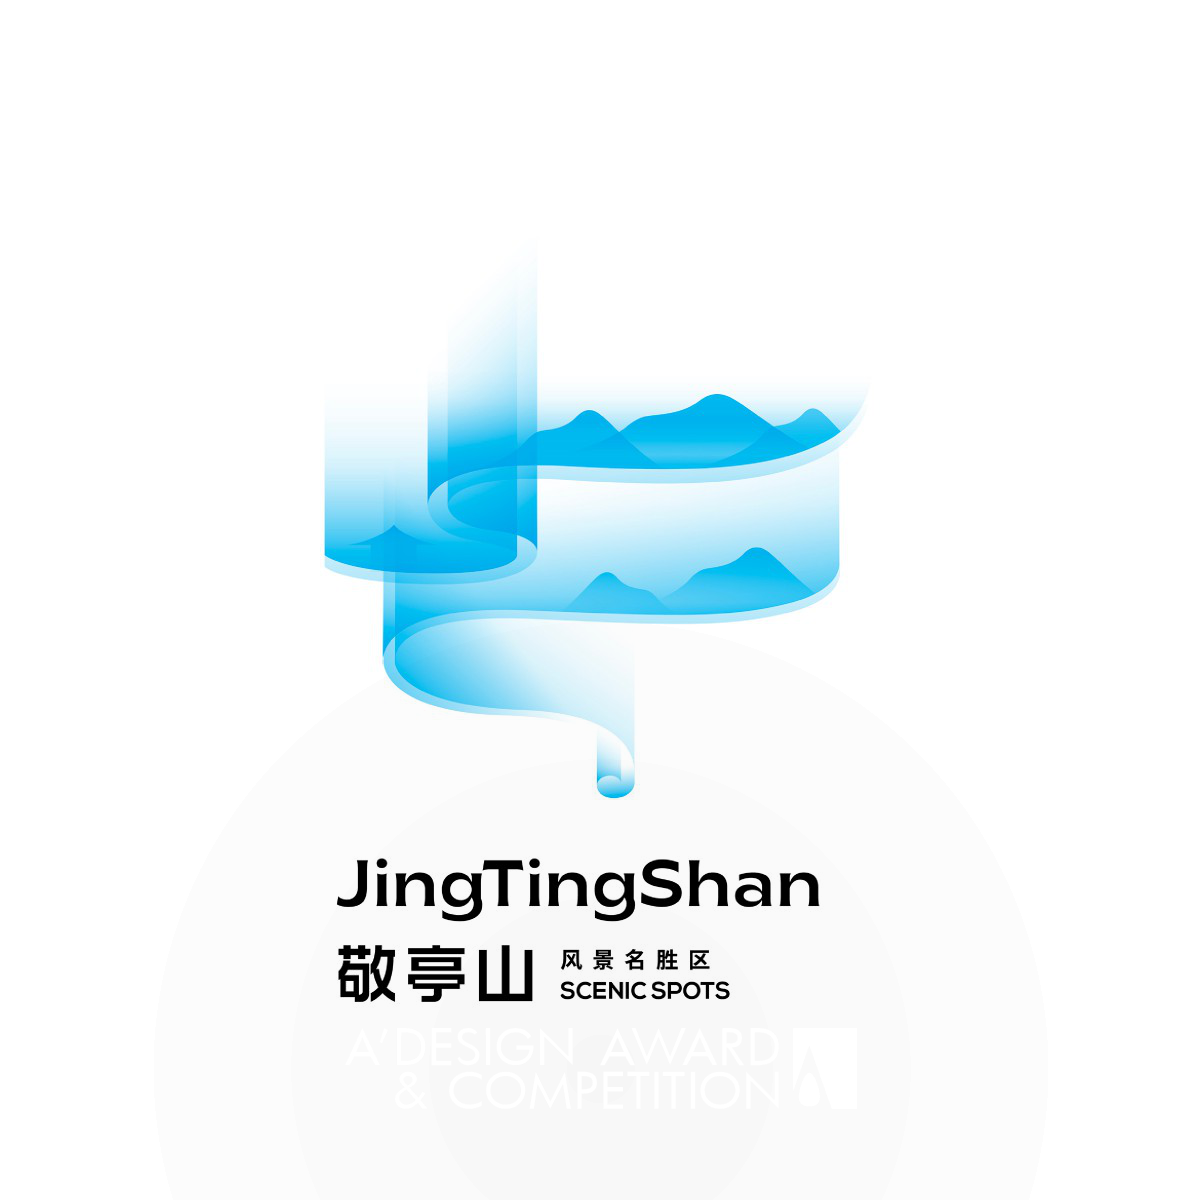 Jingting Mountain Scenic Area Brand Identity by Kan Zhao